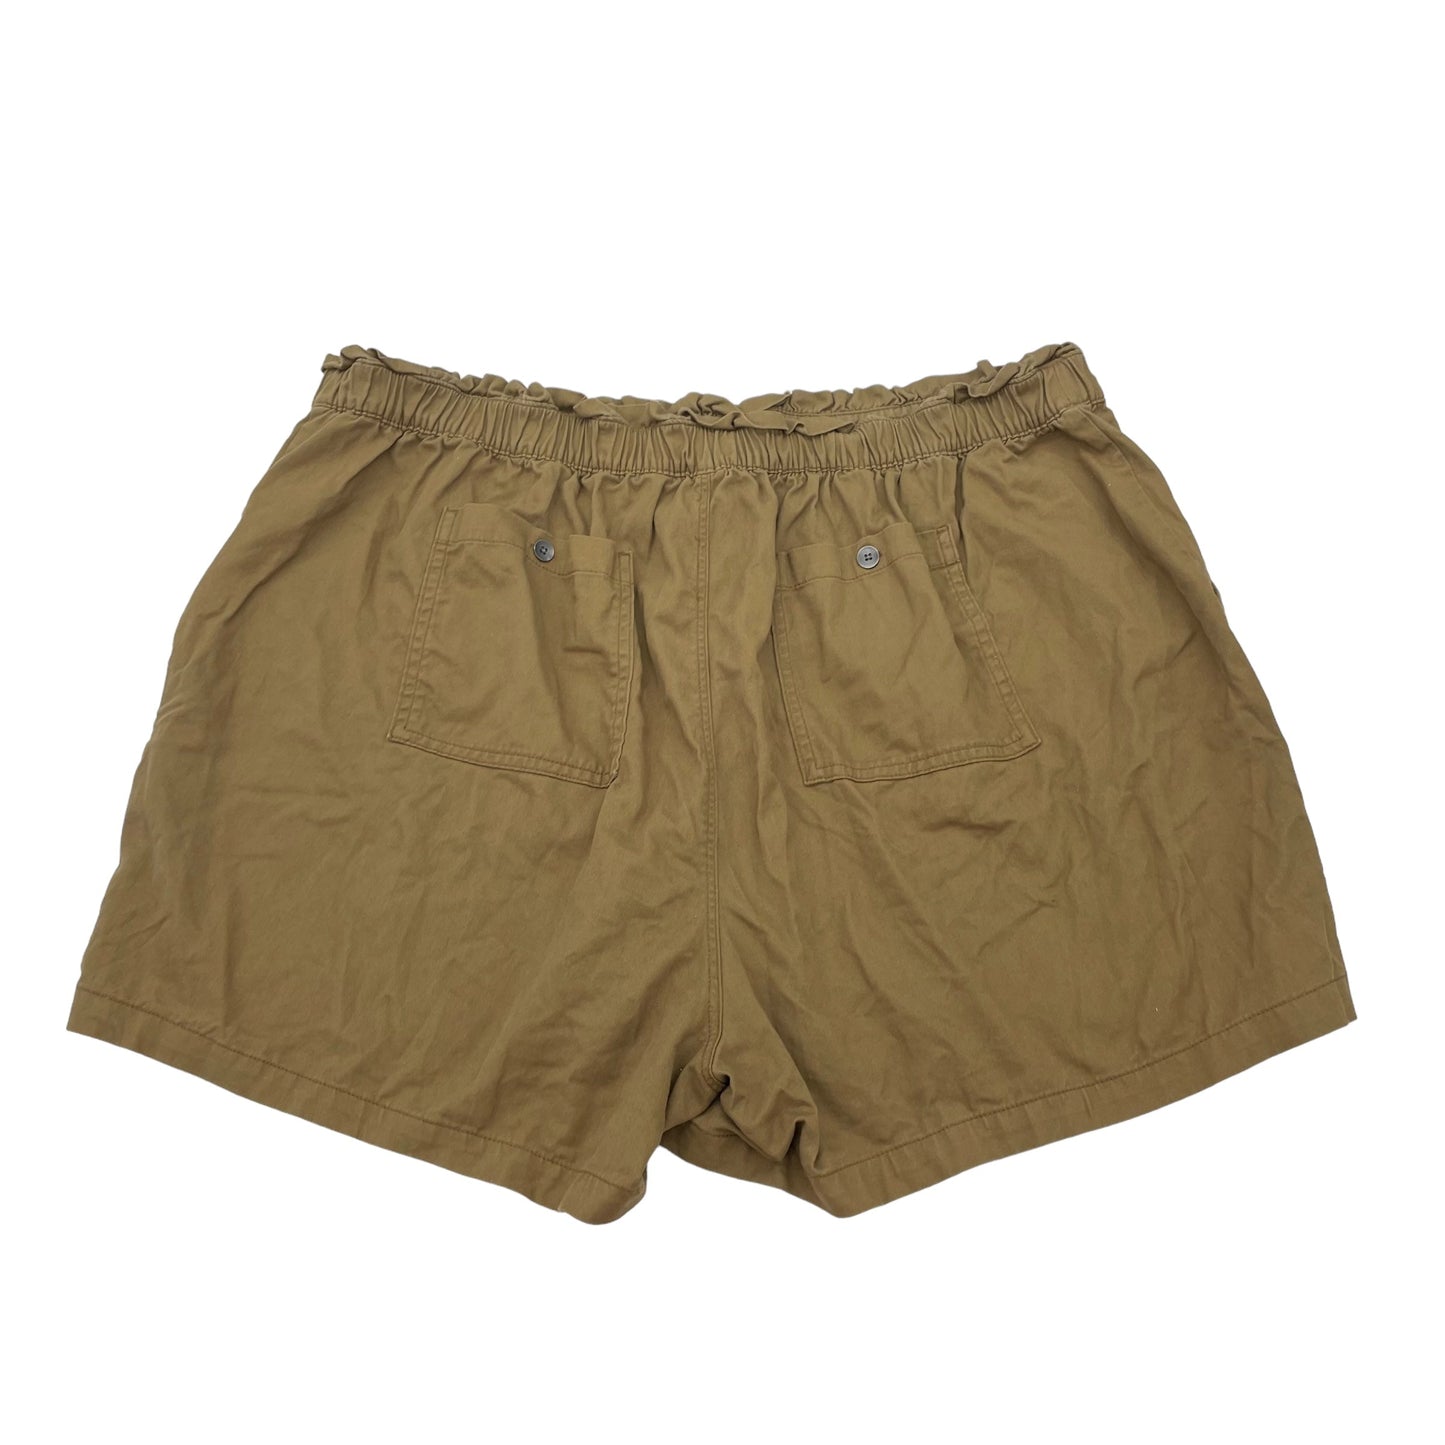 BROWN OLD NAVY SHORTS, Size 3X